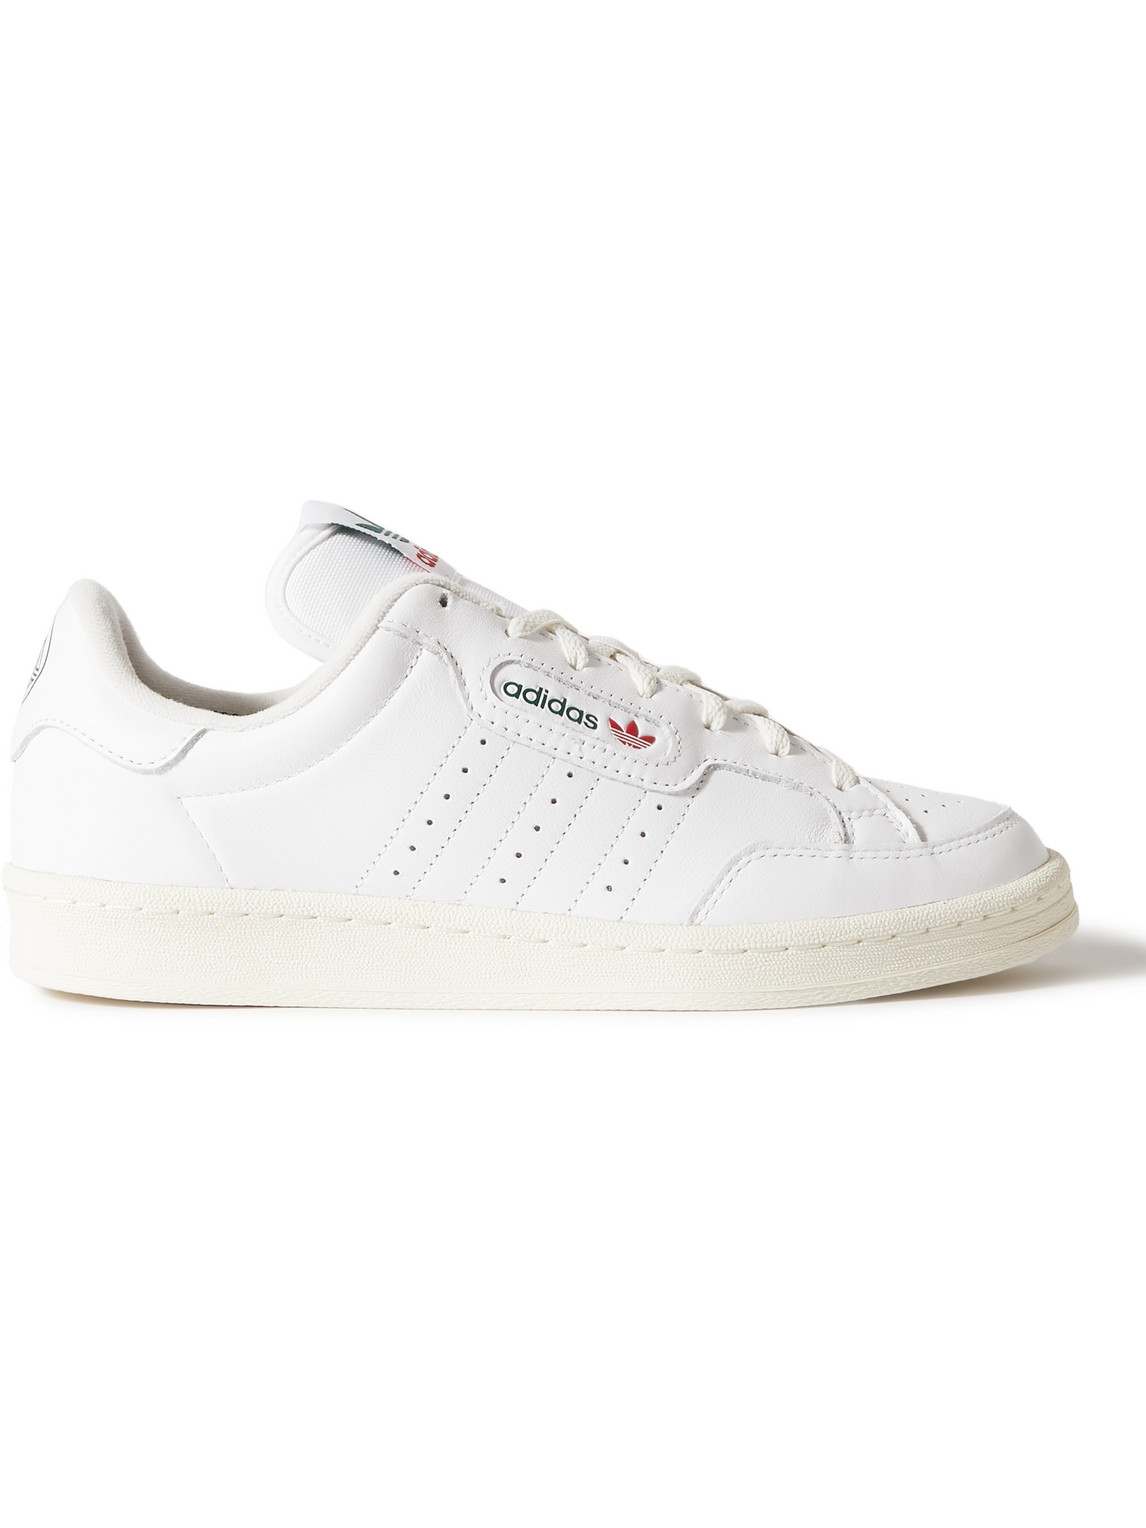 Adidas Consortium Englewood Spzl Perforated Leather Trainers In White